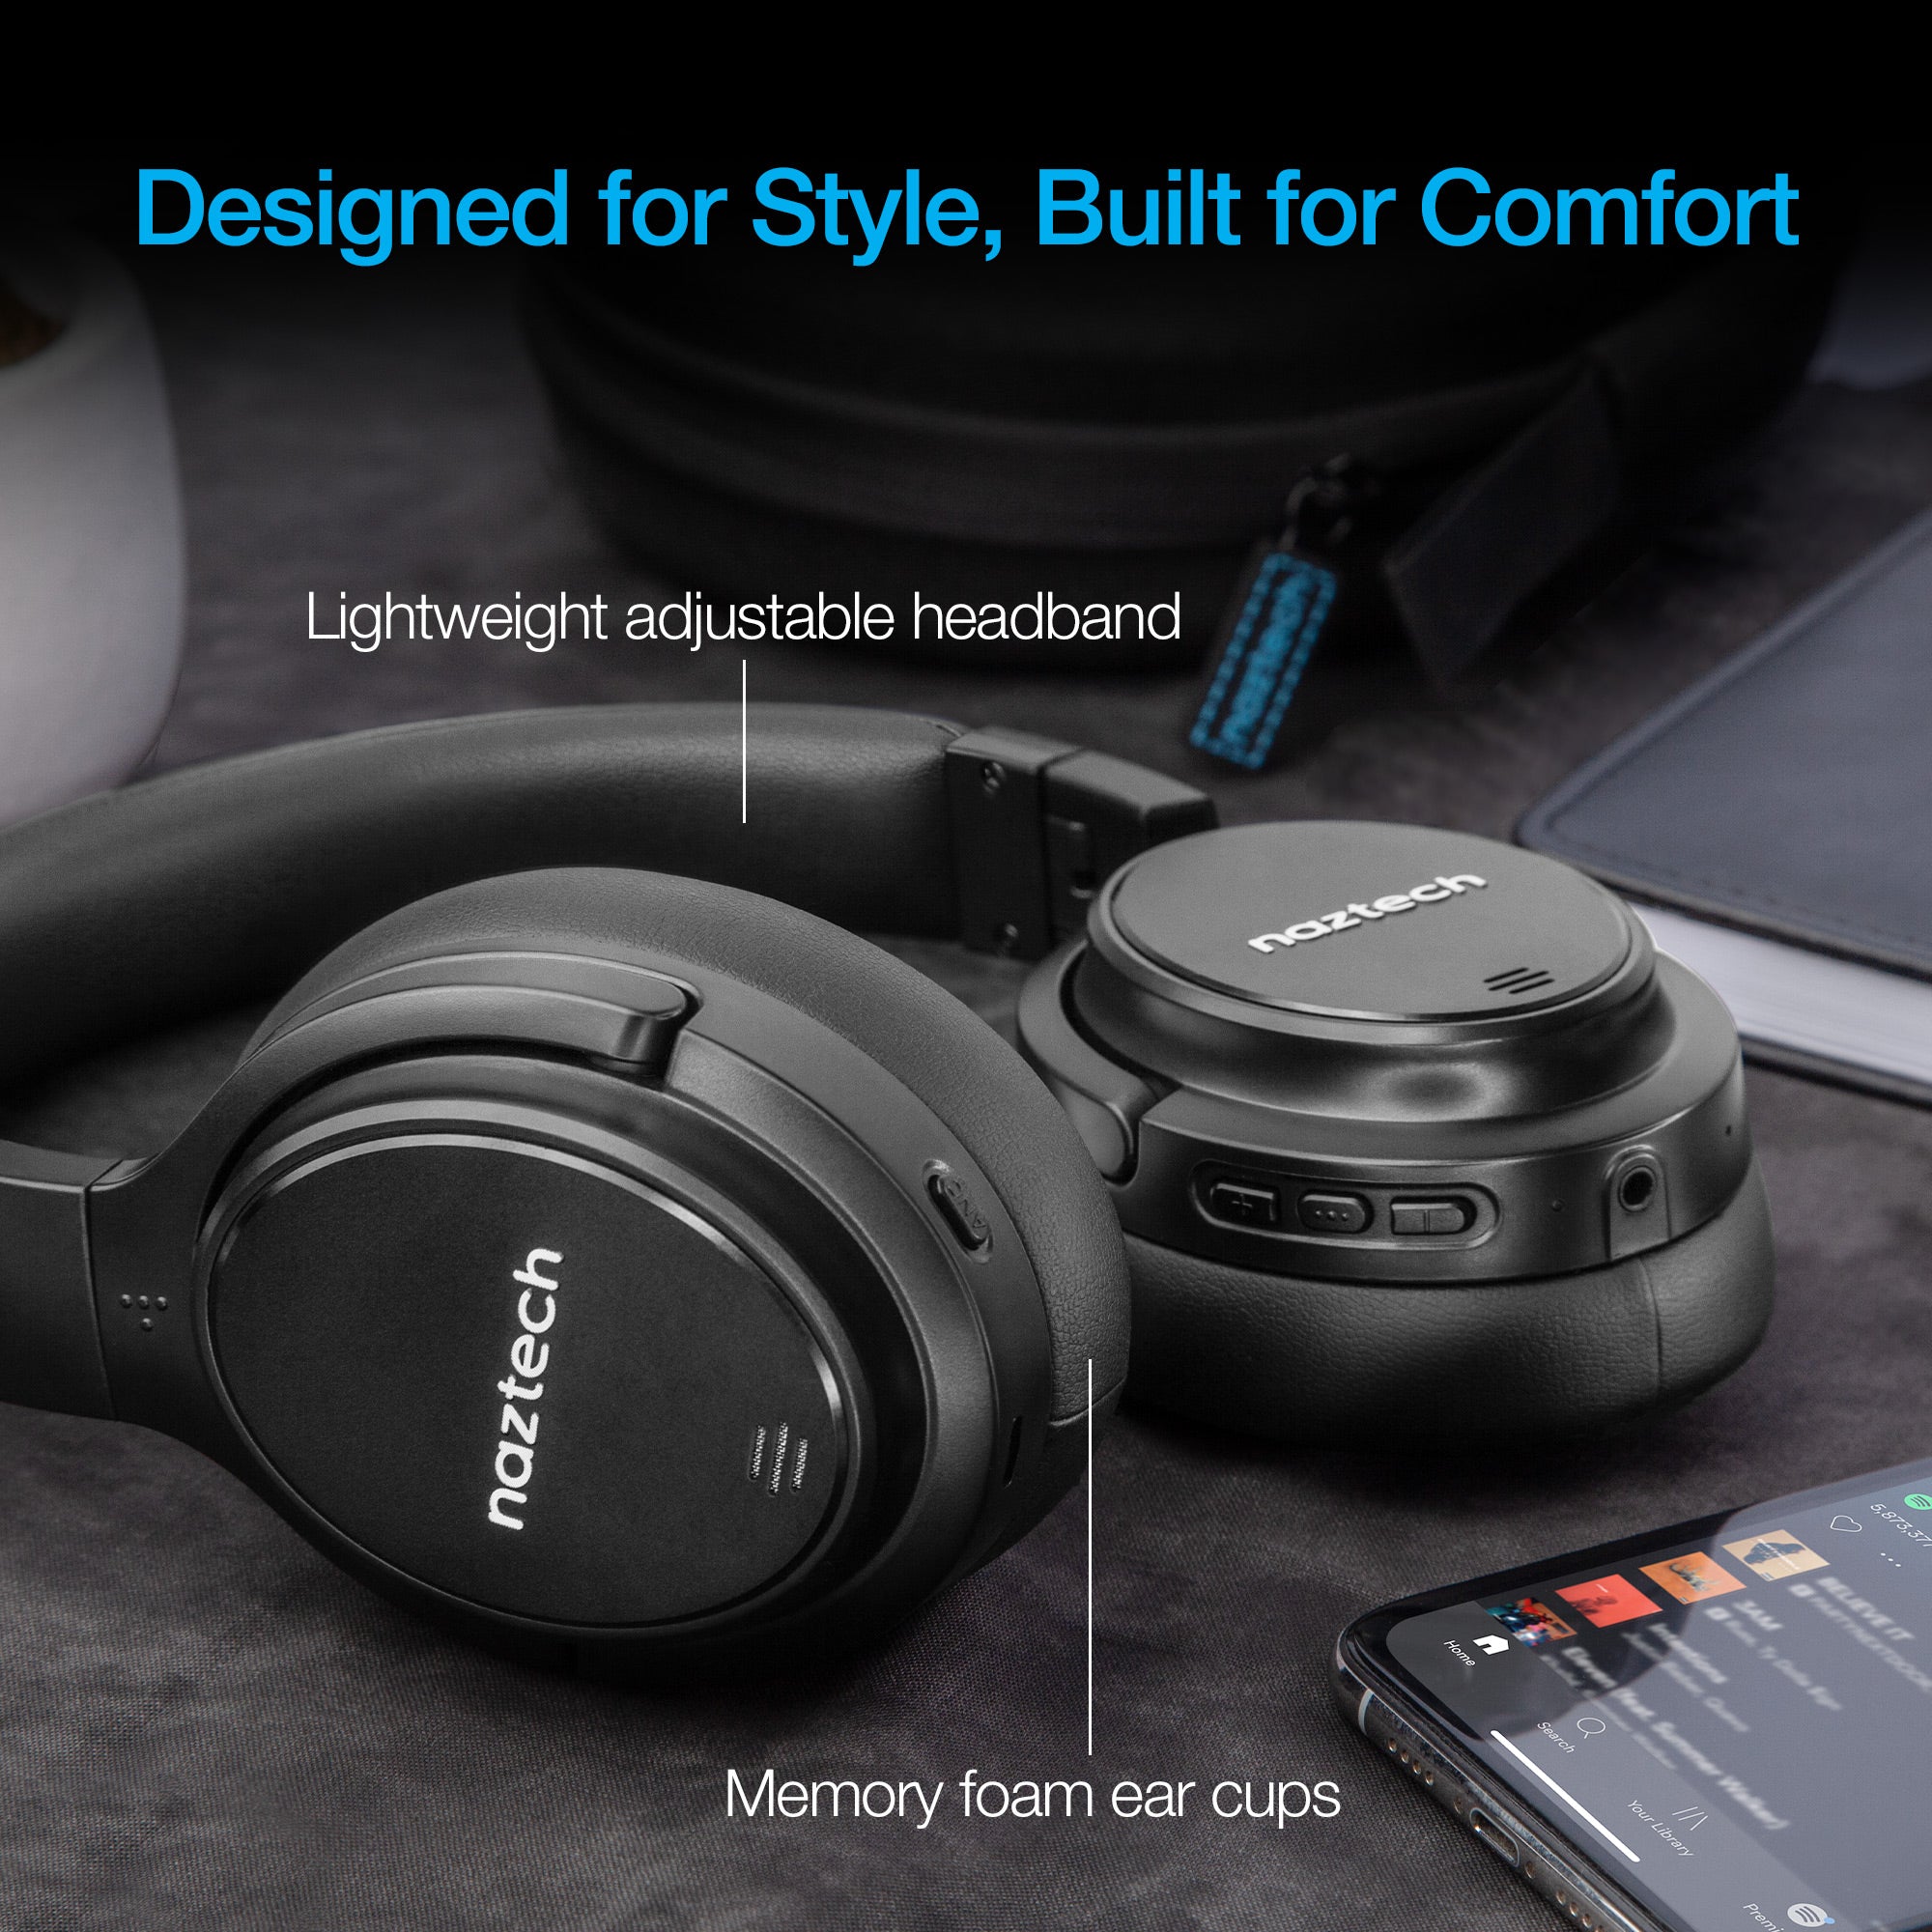 Soundcore Life Q35 Headphones Review: Great ANC and Design! 